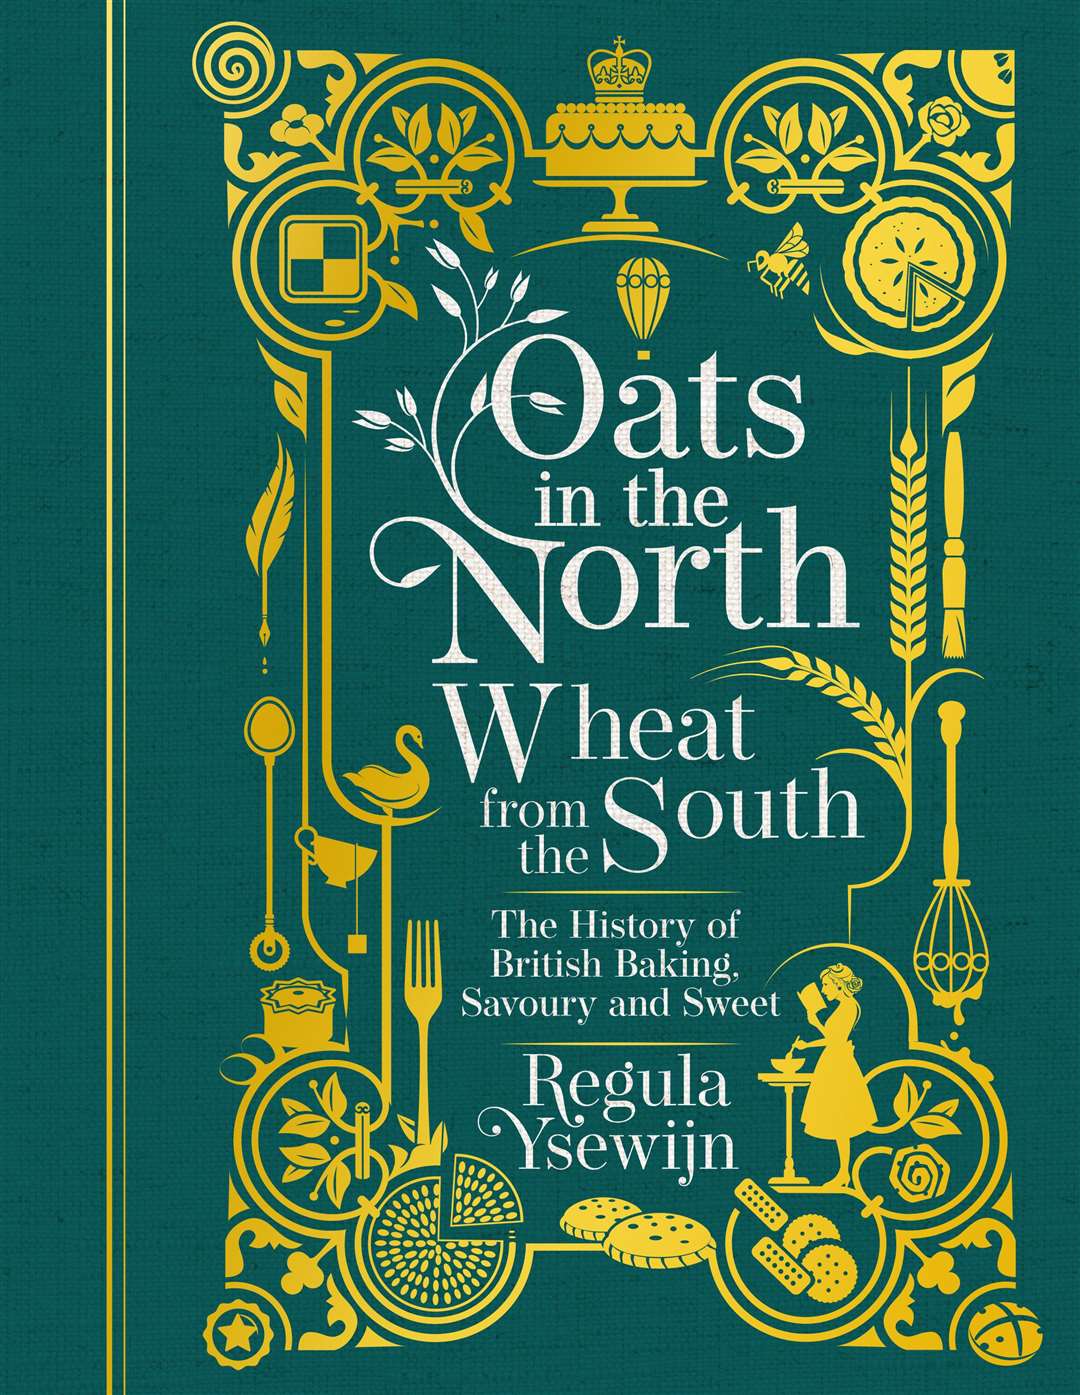 Oats in the North, Wheat from the South: The history of British baking, savoury and sweet by Regula Ysewijn (£25, Murdoch Books). Picture: Regula Ysewijn/PA